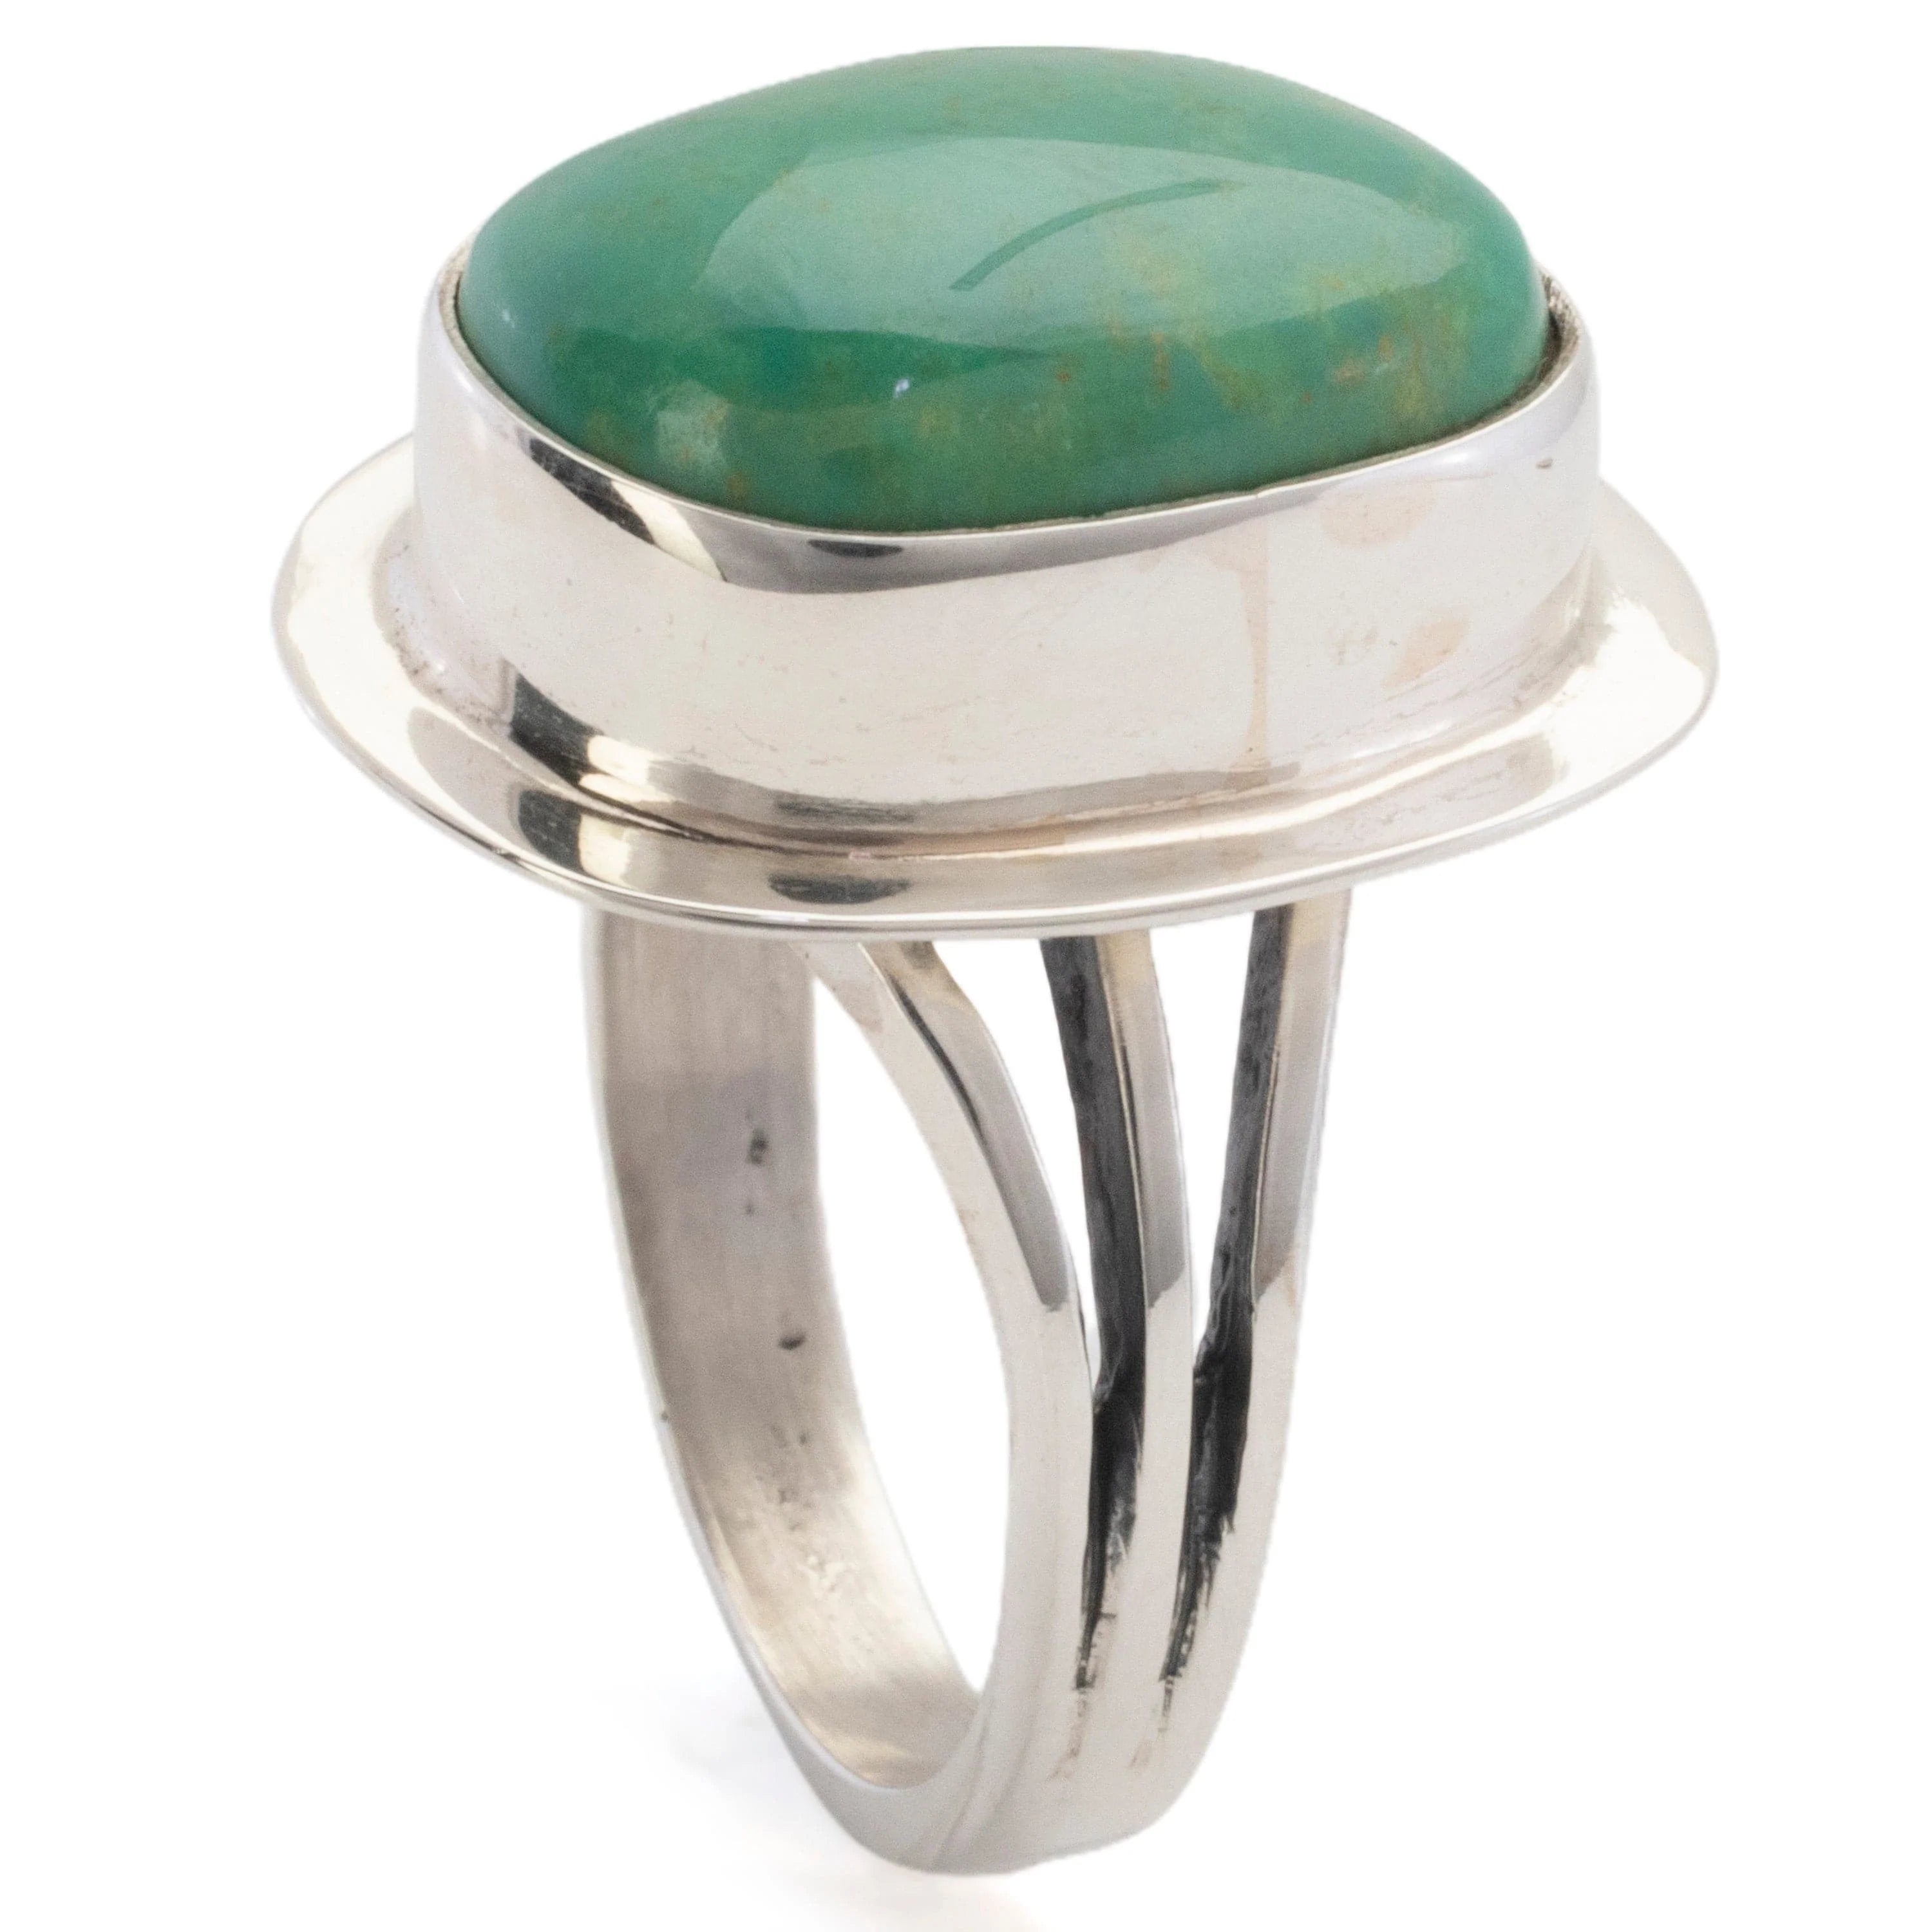 Kalifano Southwest Silver Jewelry 8 Kingman Turquoise USA Handmade 925 Sterling Silver Ring NMR300.003.8